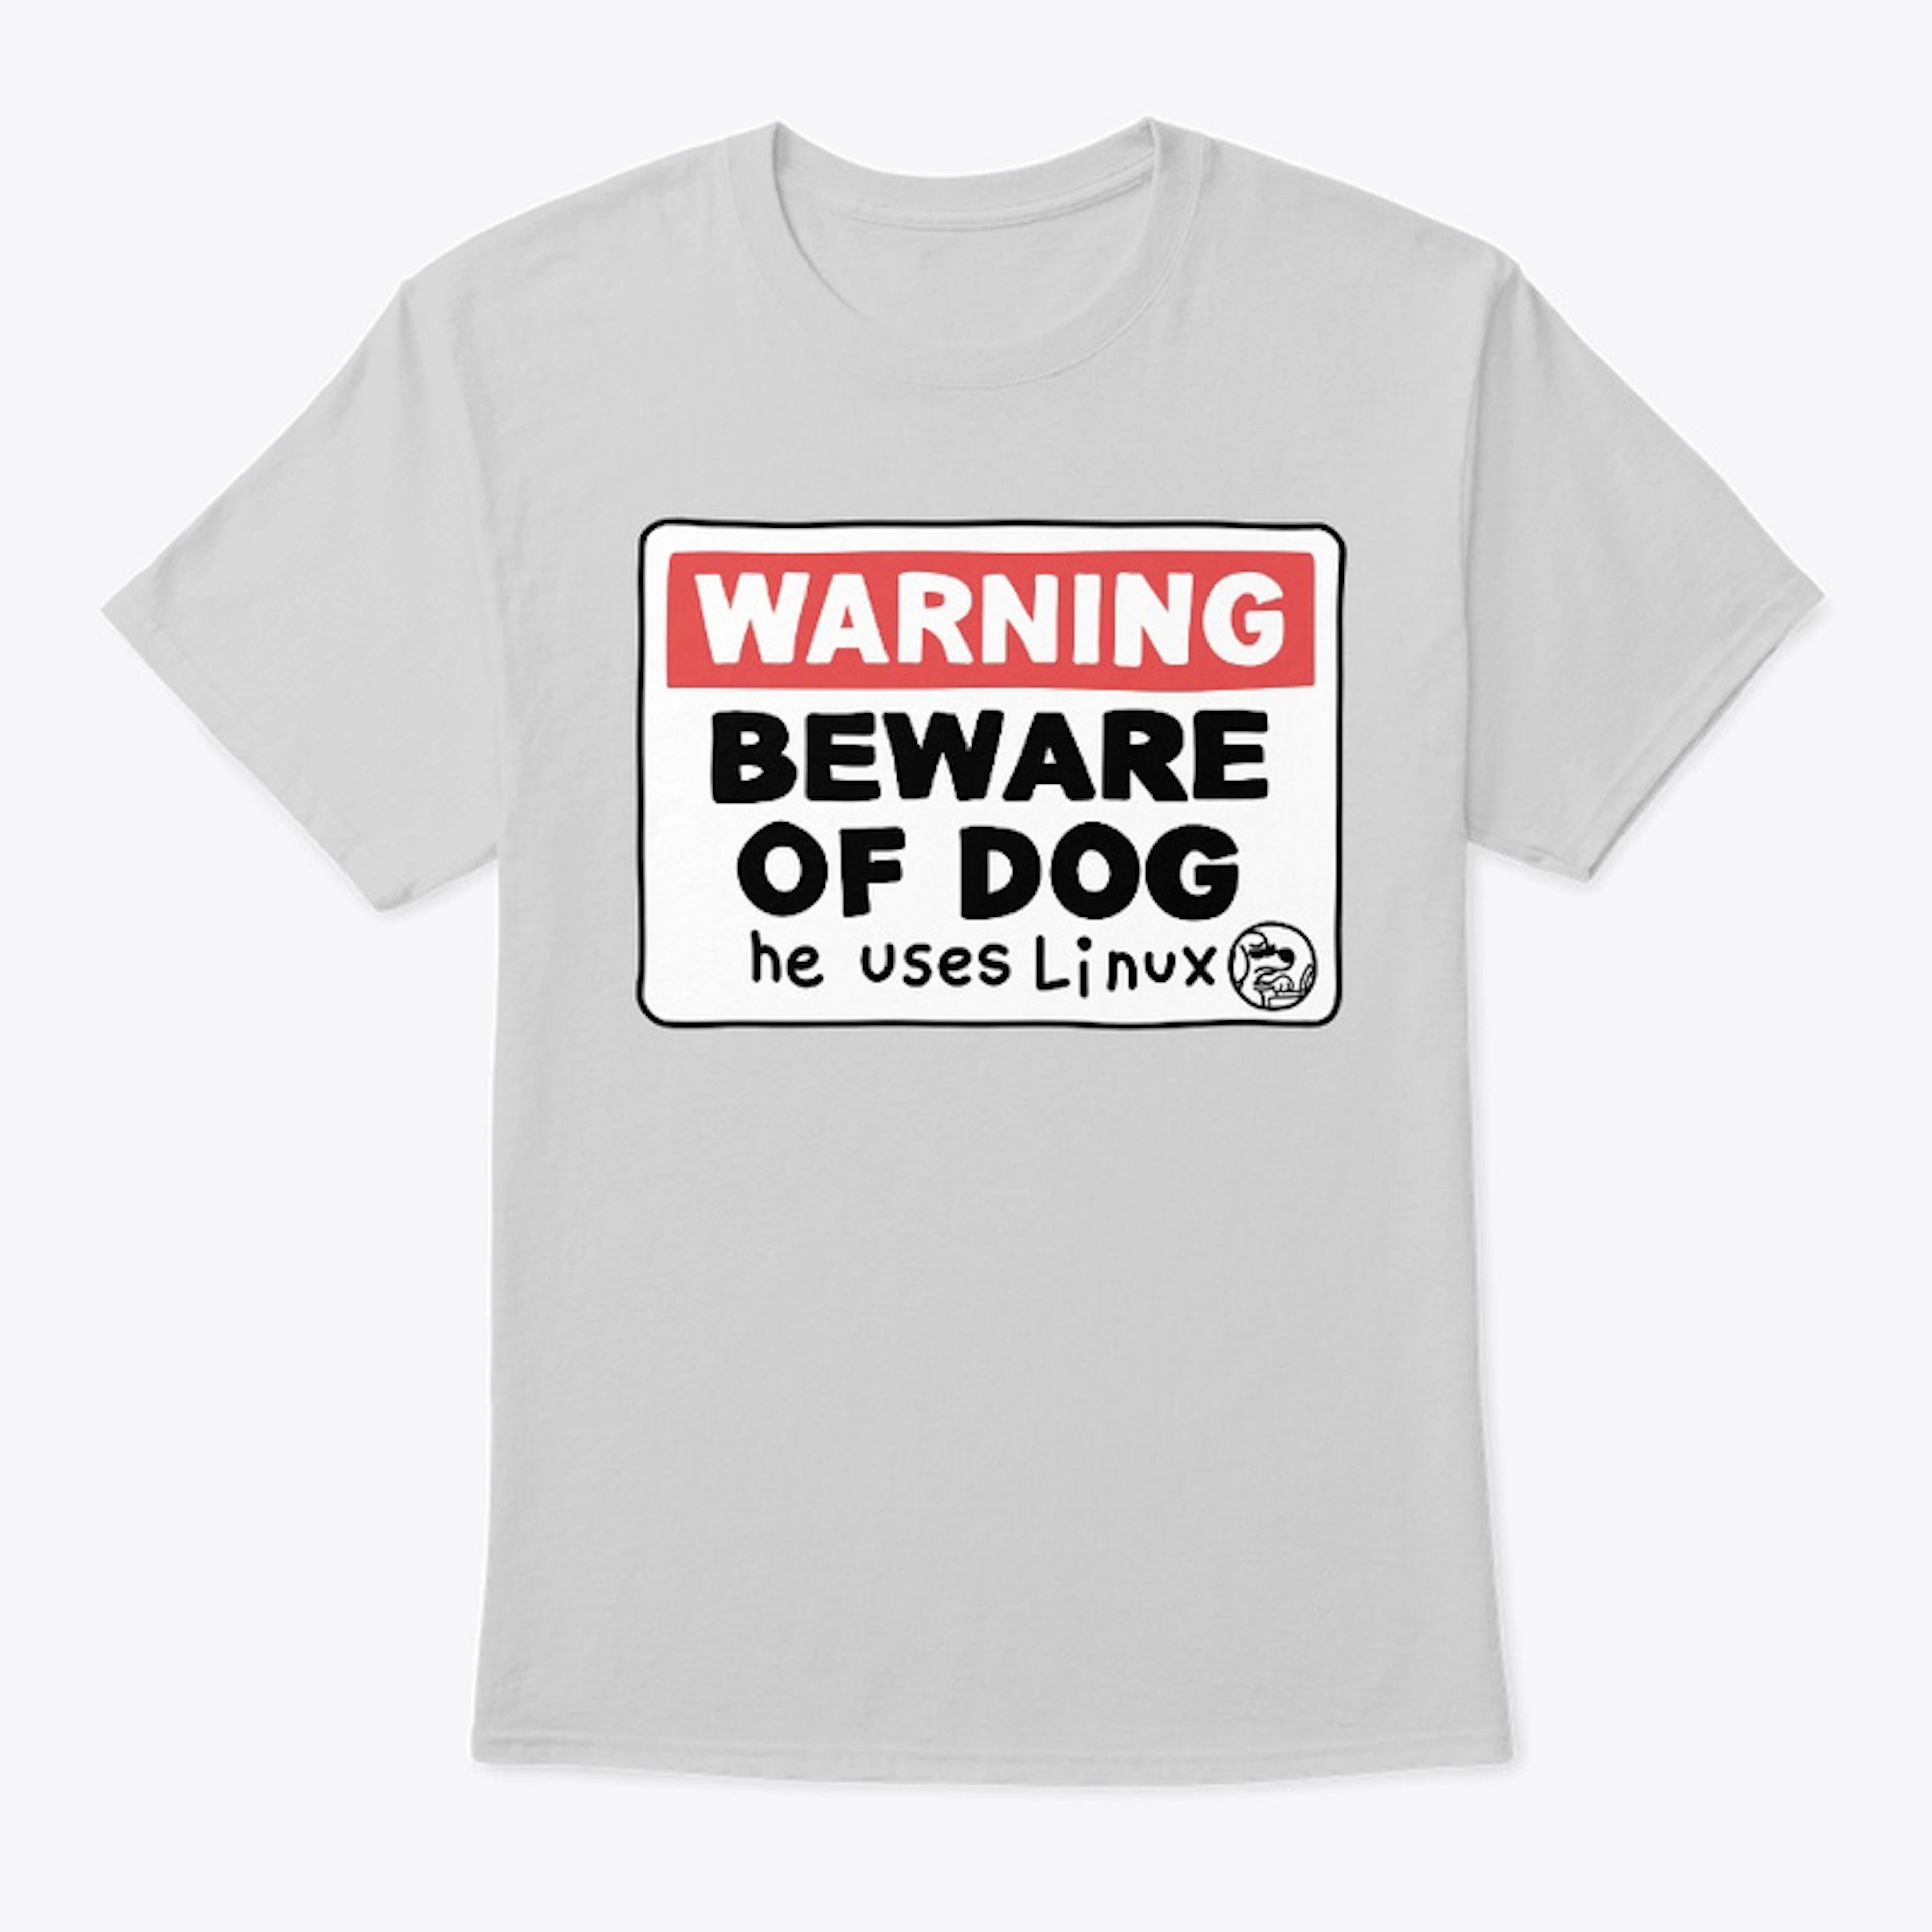 Beware of Dog: he uses Linux